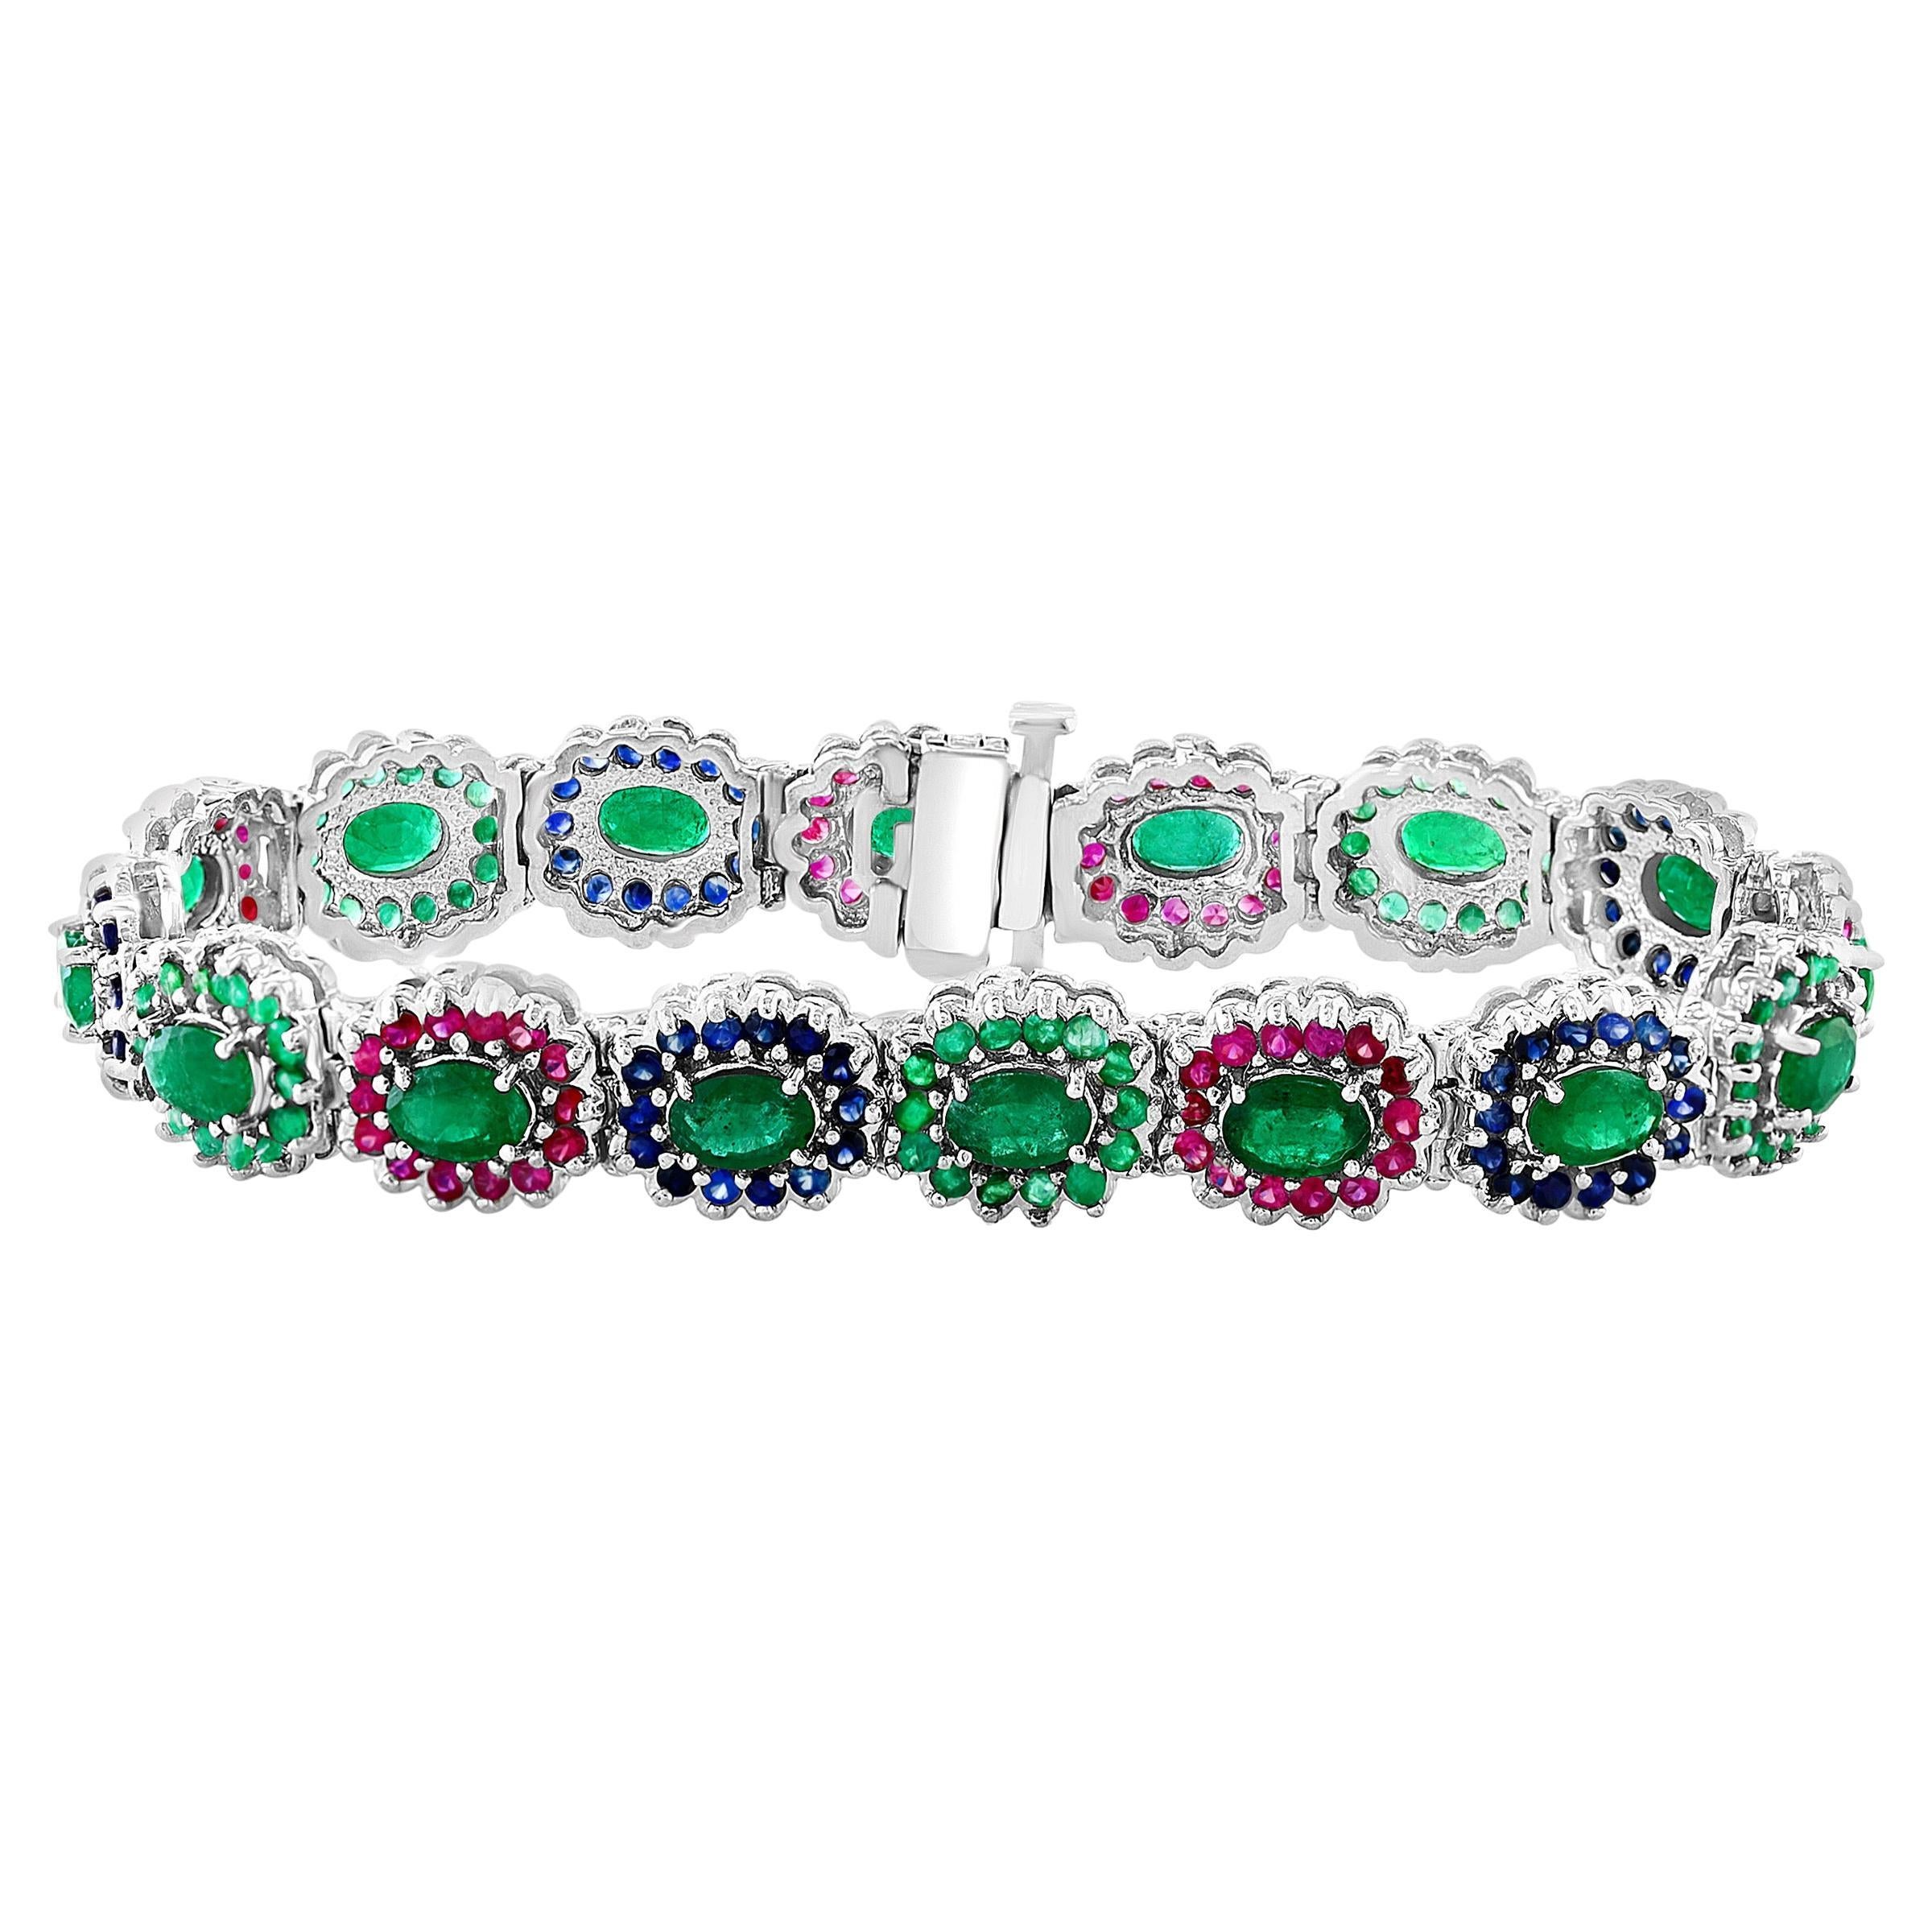 8 Ct Oval Cut Emerald & Ruby & Sapphire Tennis Bracelet 14 Kt White Gold 25.5Gm For Sale